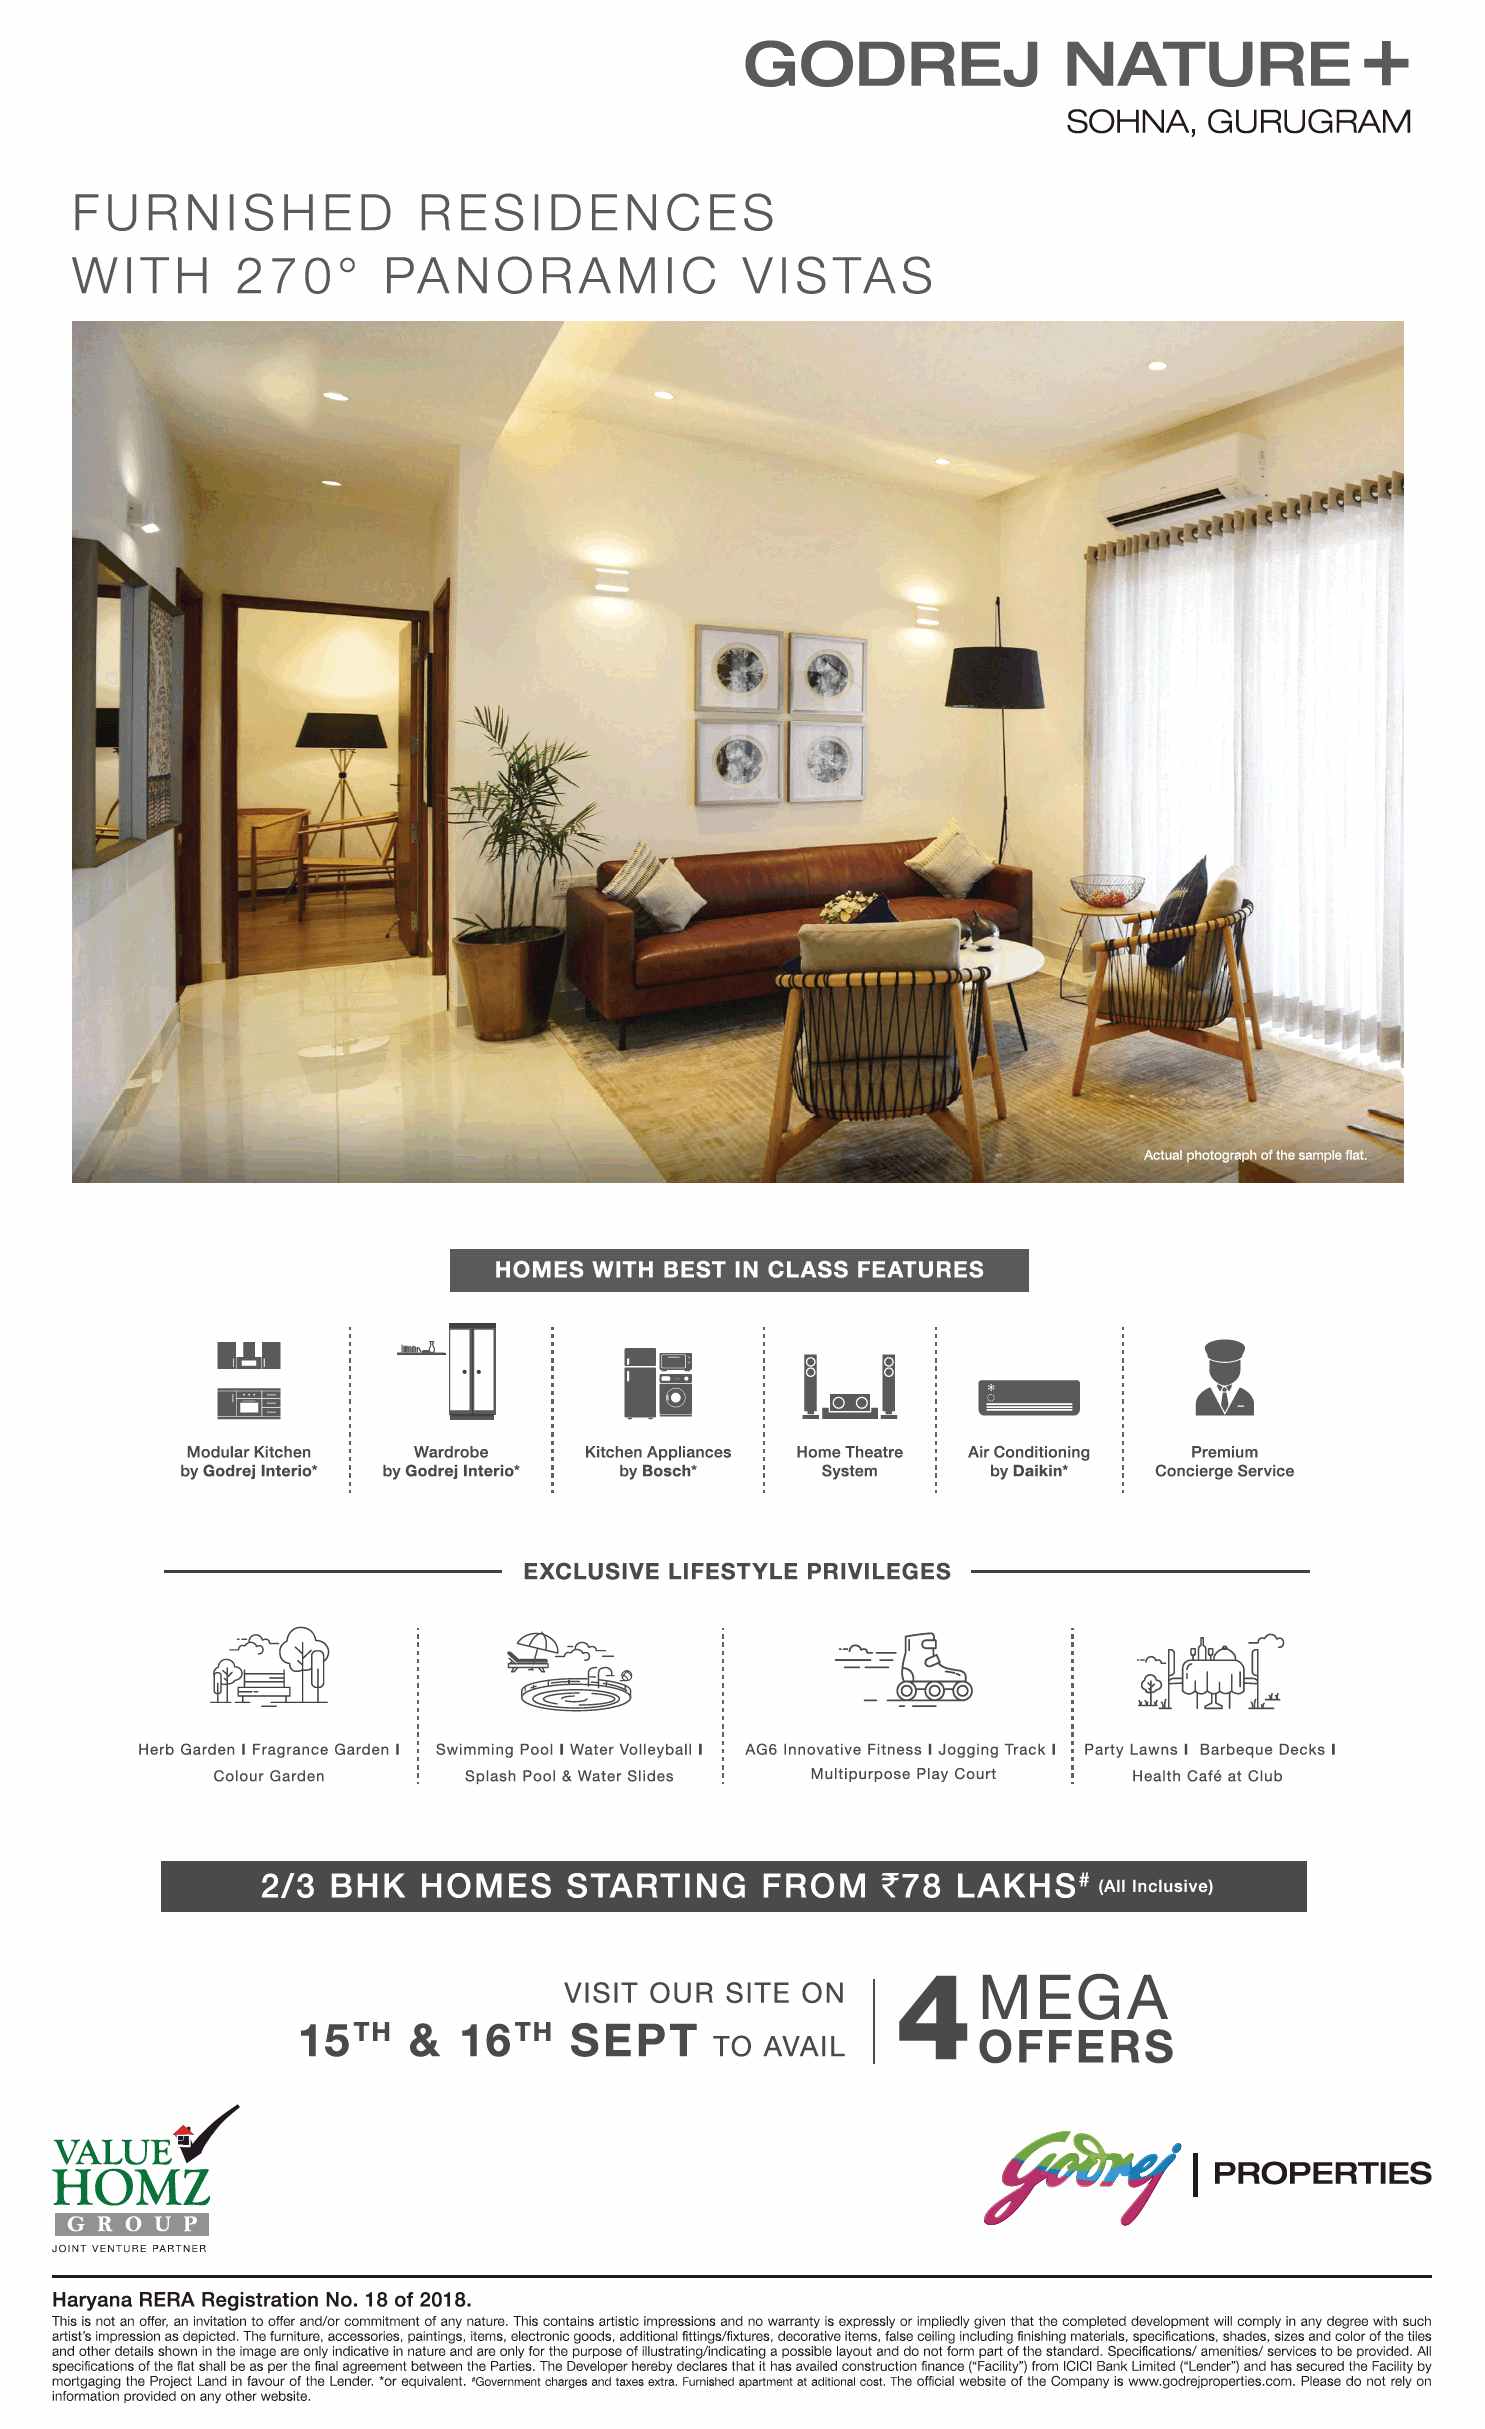 Presenting furnished residences with 270 degree panoramic vistas at Godrej Nature Plus in Sohna